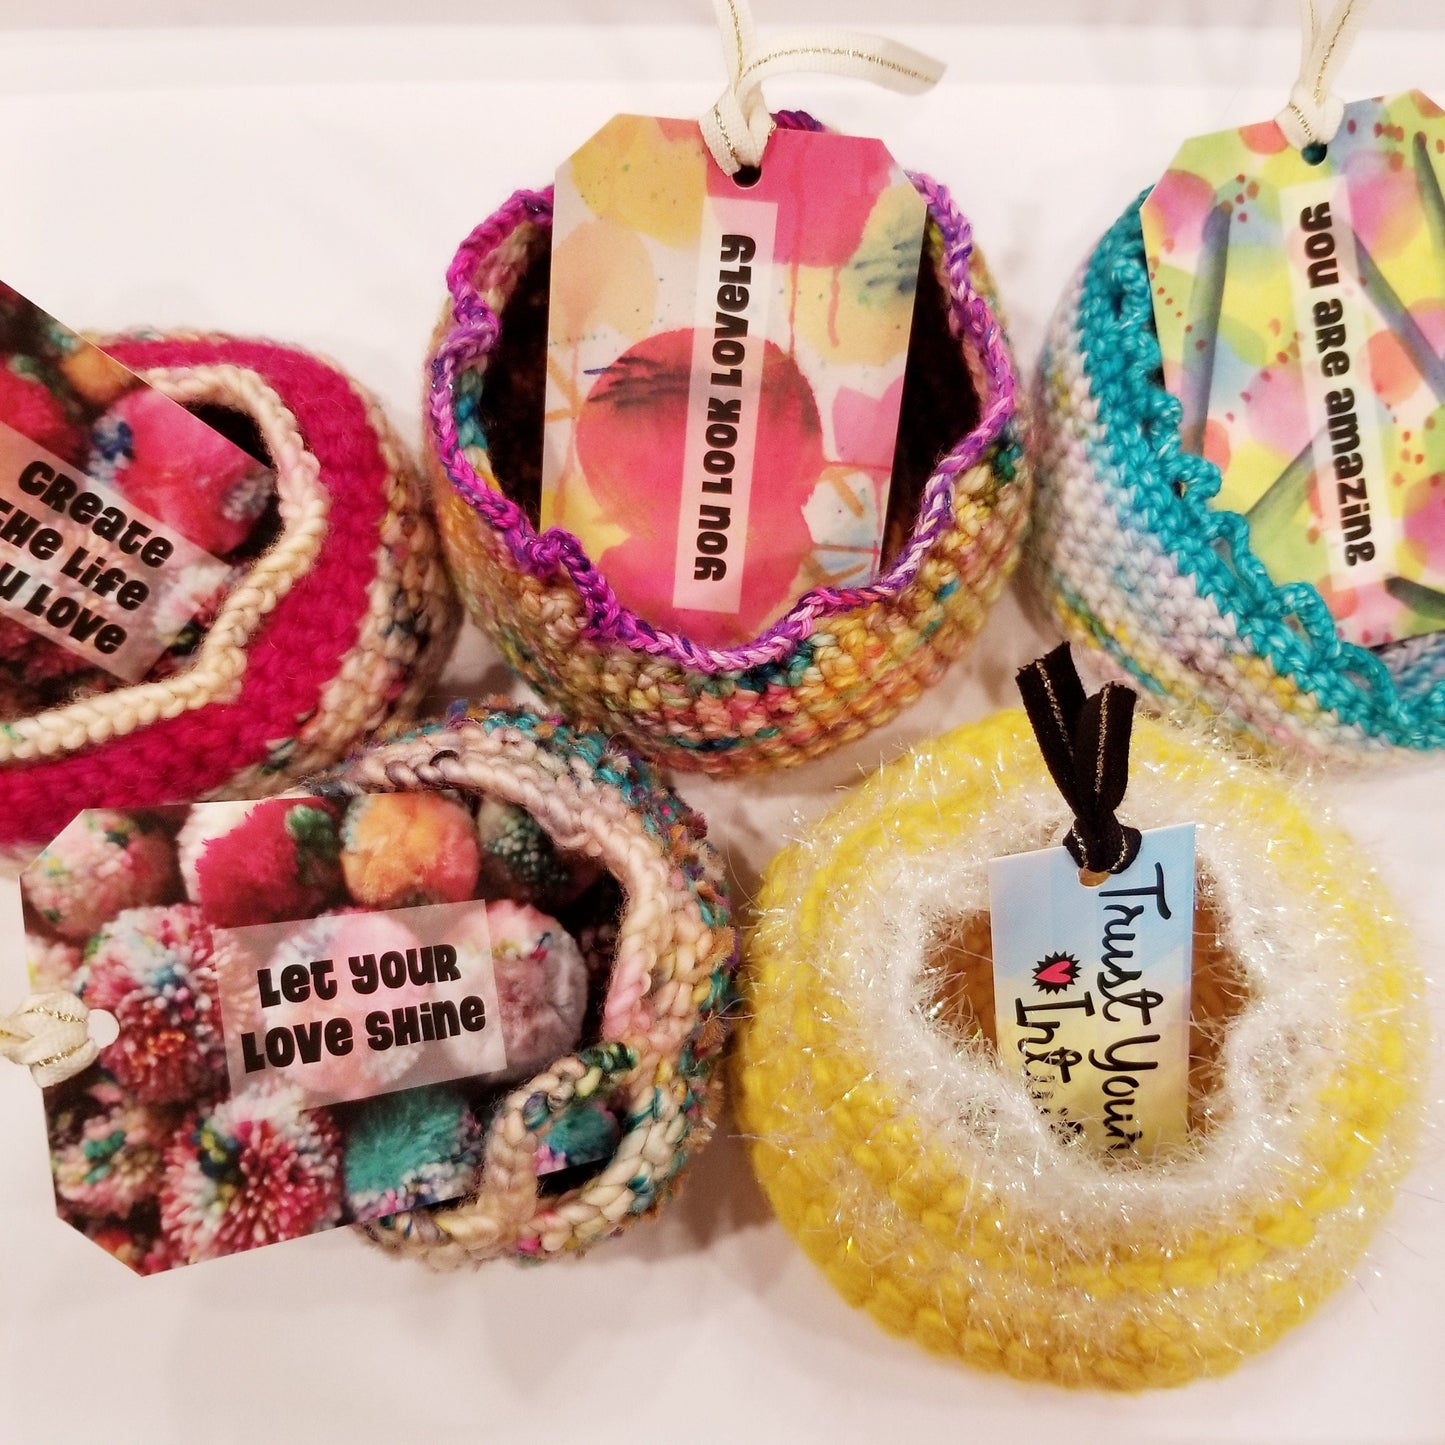 Custom Crochet Basket - Sweet and Just Right!